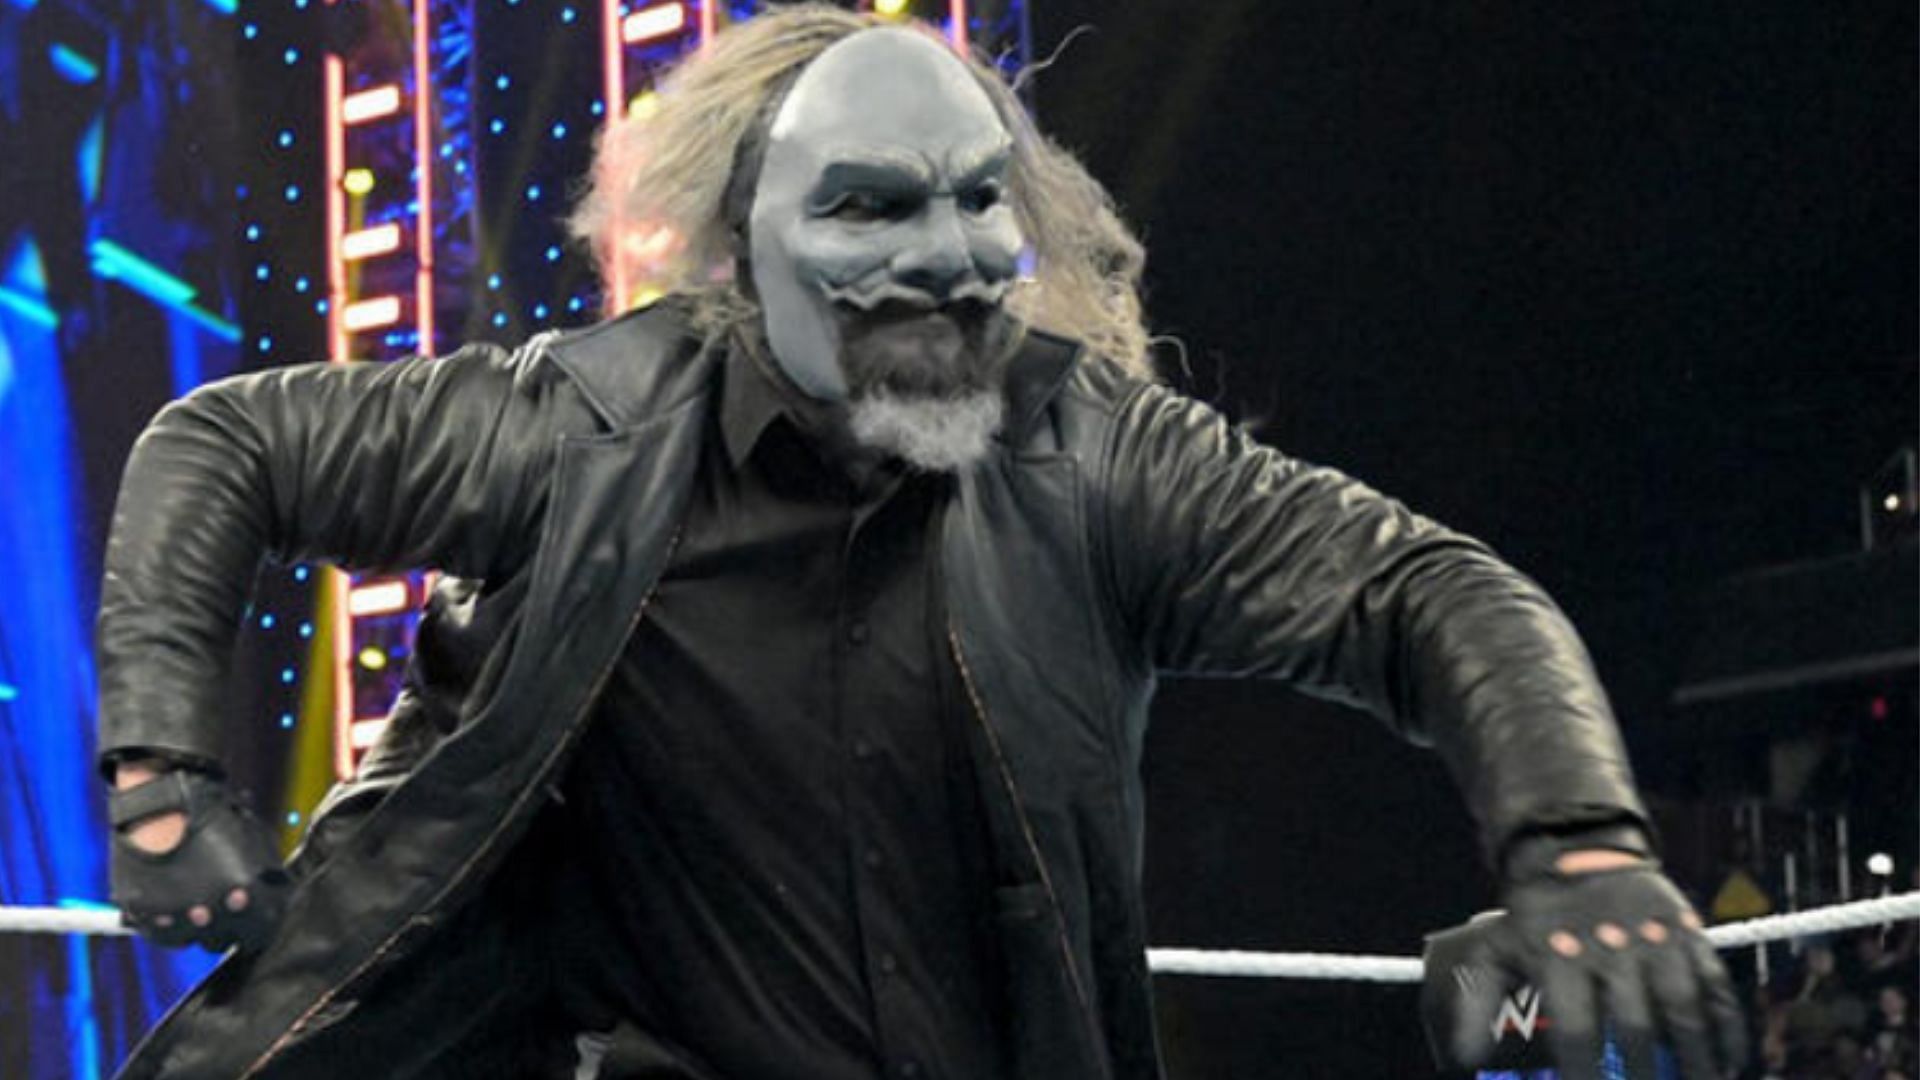 Uncle Howdy may be returning to WWE imminently [Image Credits: WWE